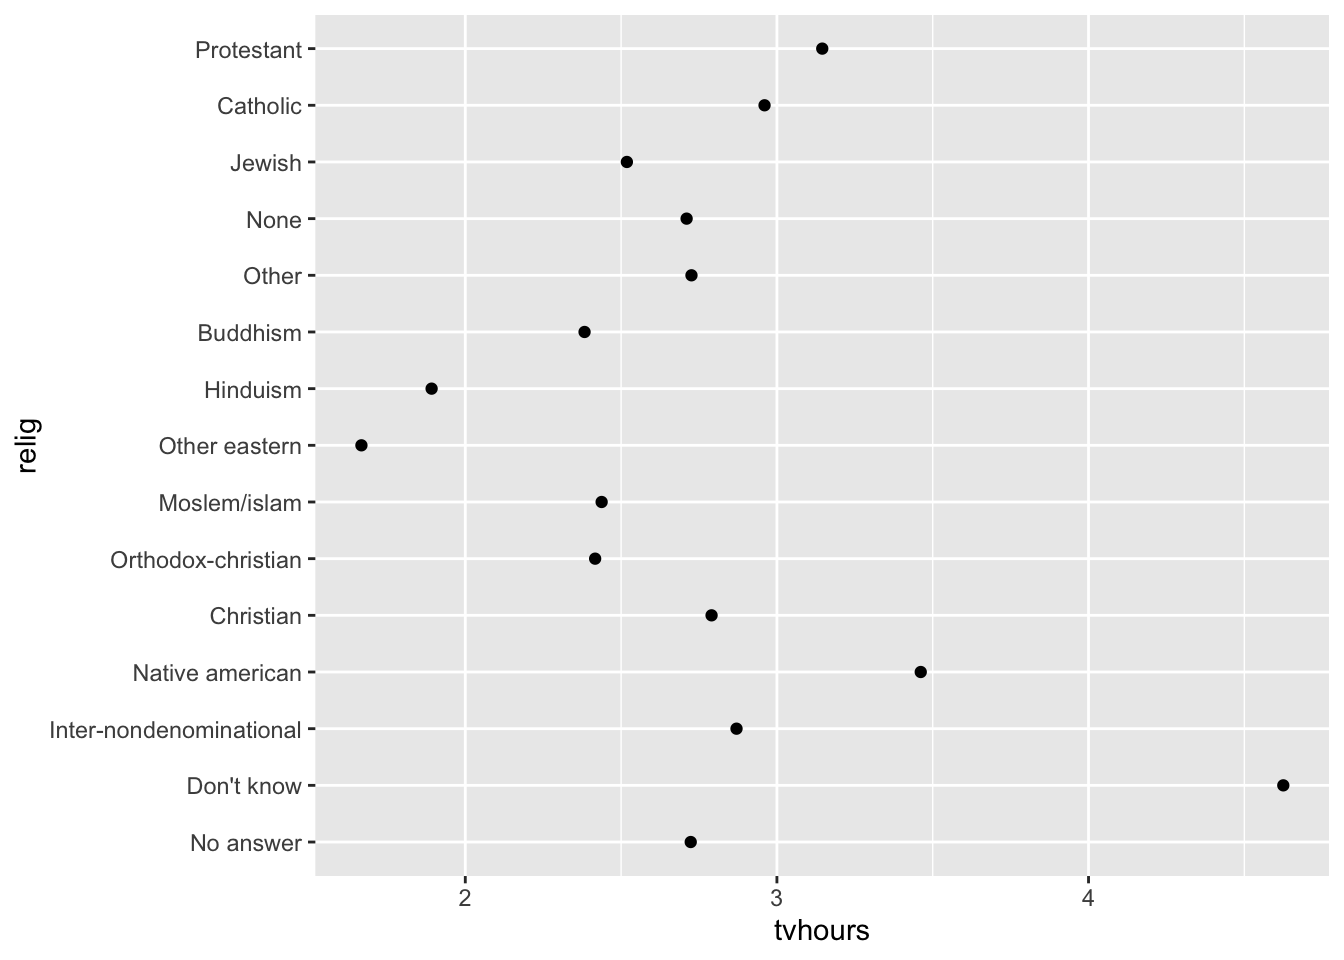 A scatterplot of with tvhours on the x-axis and religion on the y-axis. The y-axis is ordered seemingly aribtrarily making it hard to get any sense of overall pattern.